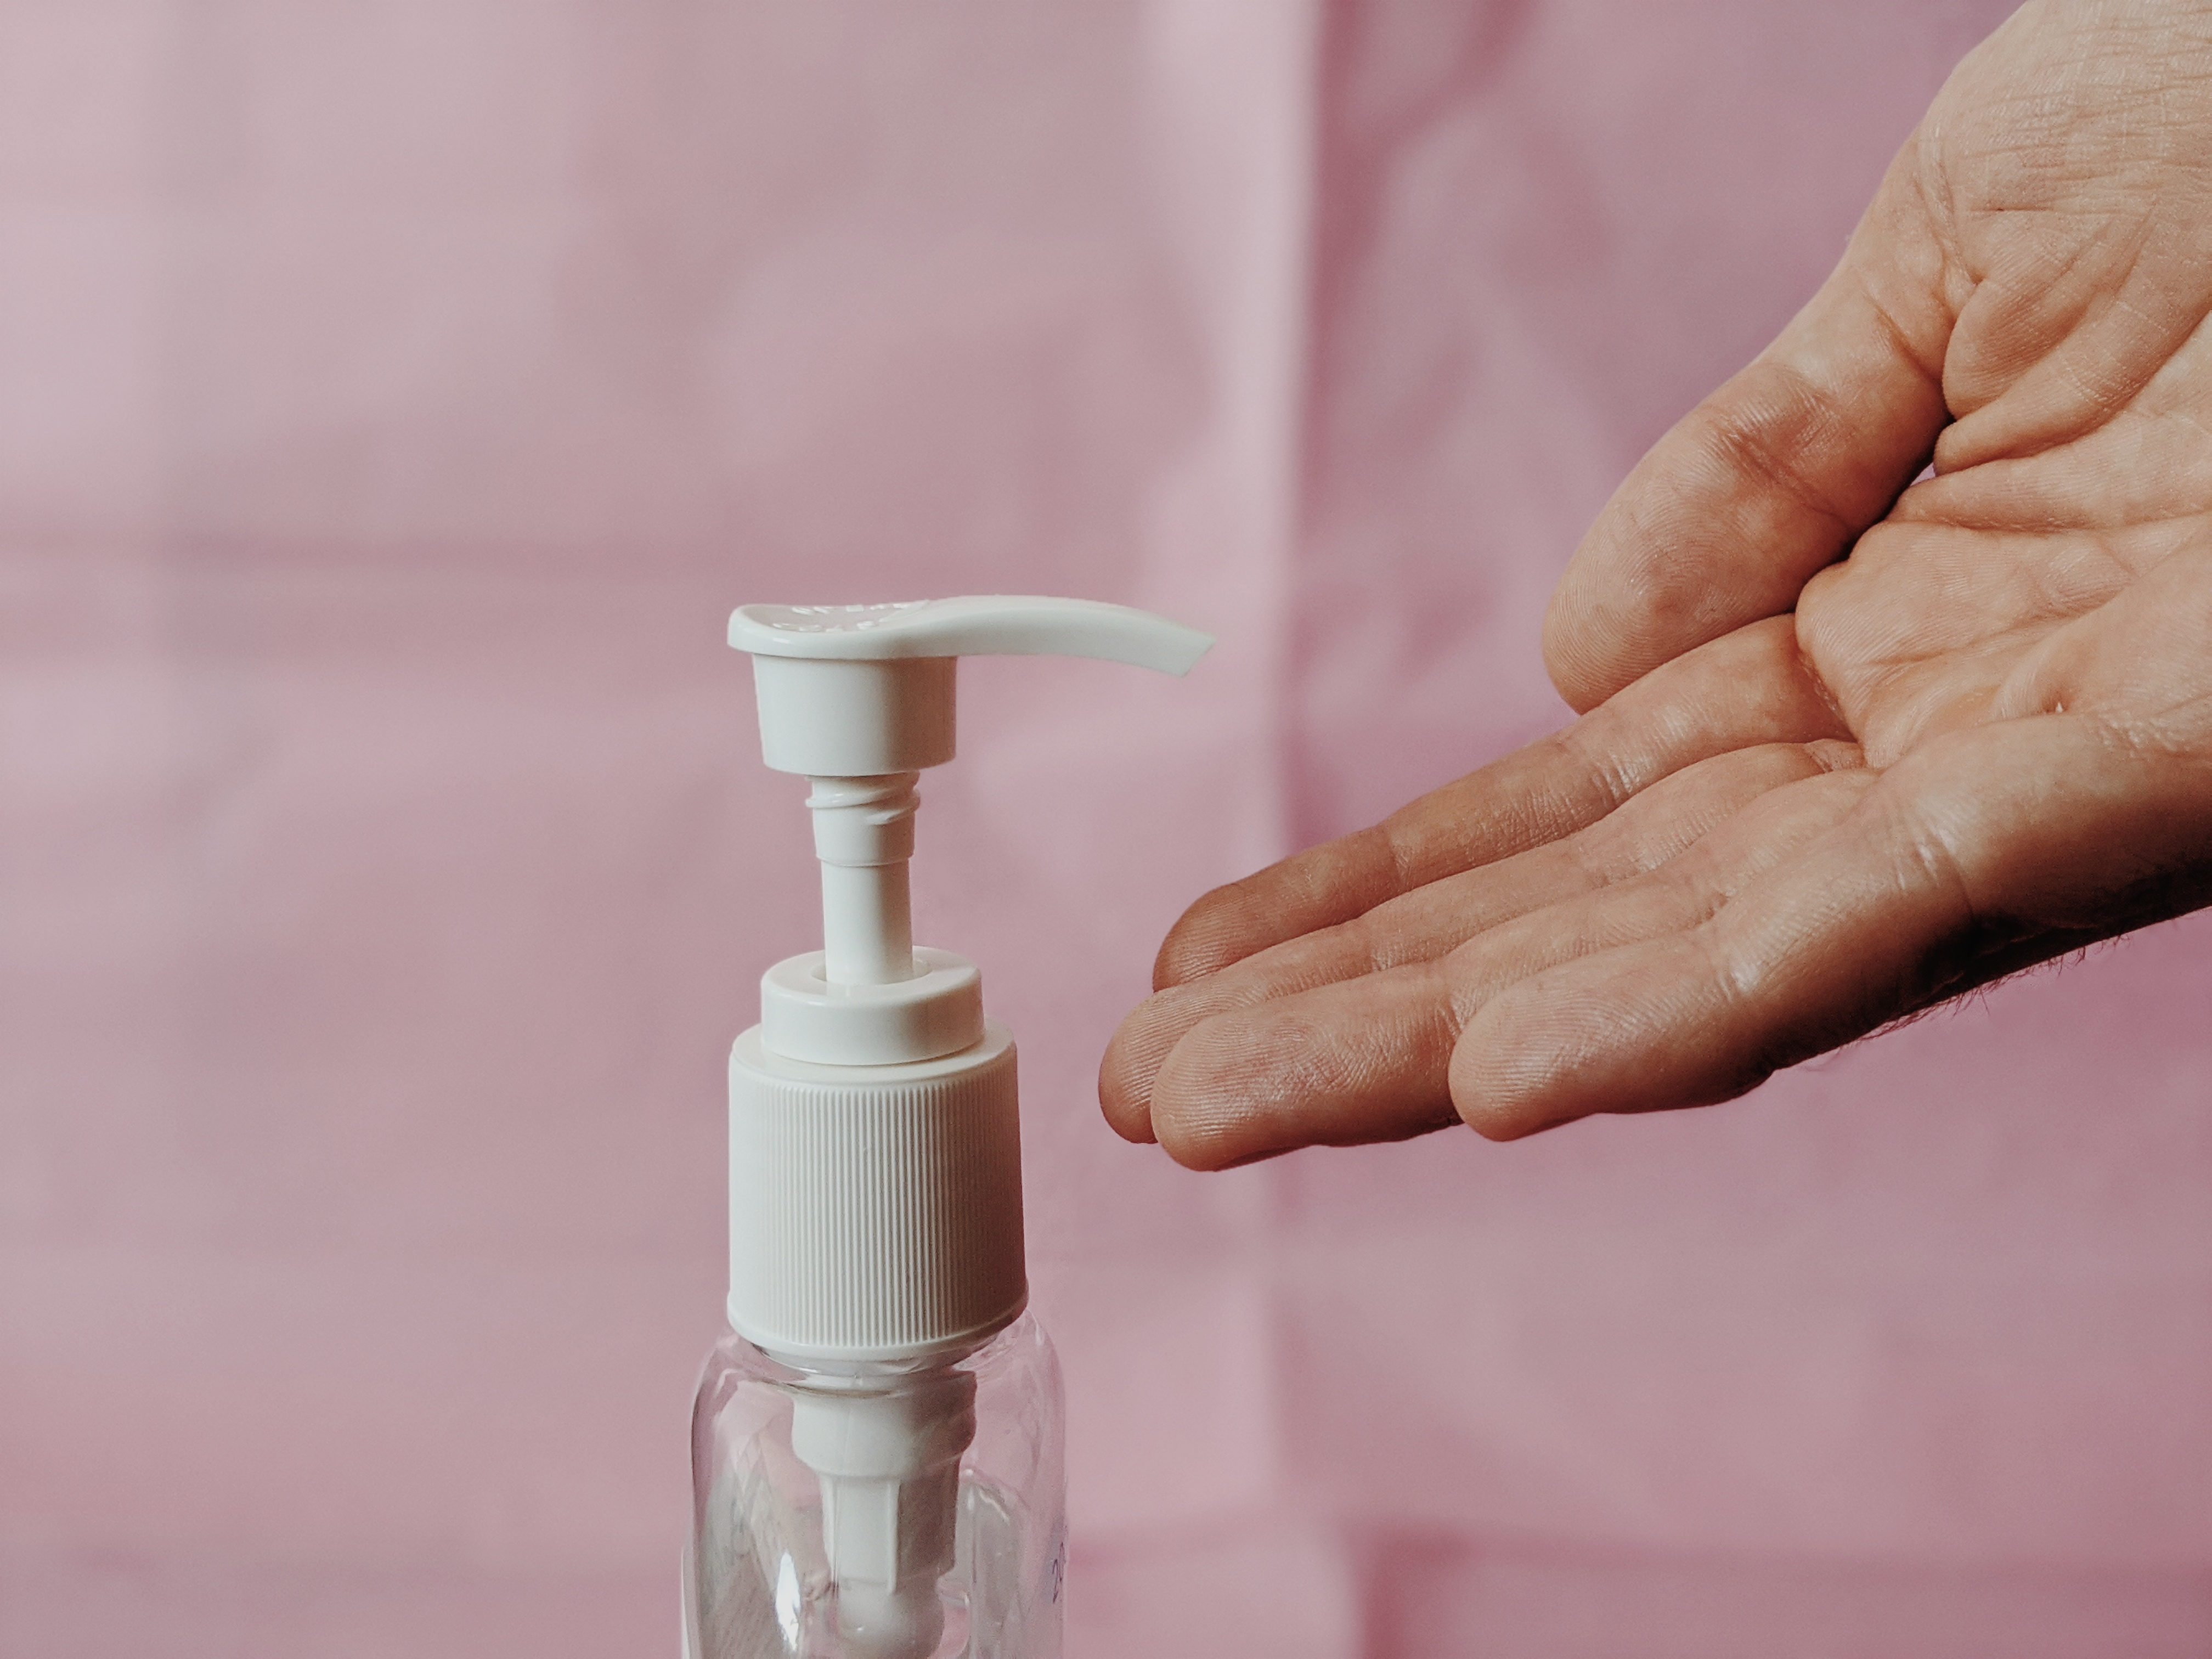 Hand sanitizer bottle pictured with a hand ready to clean